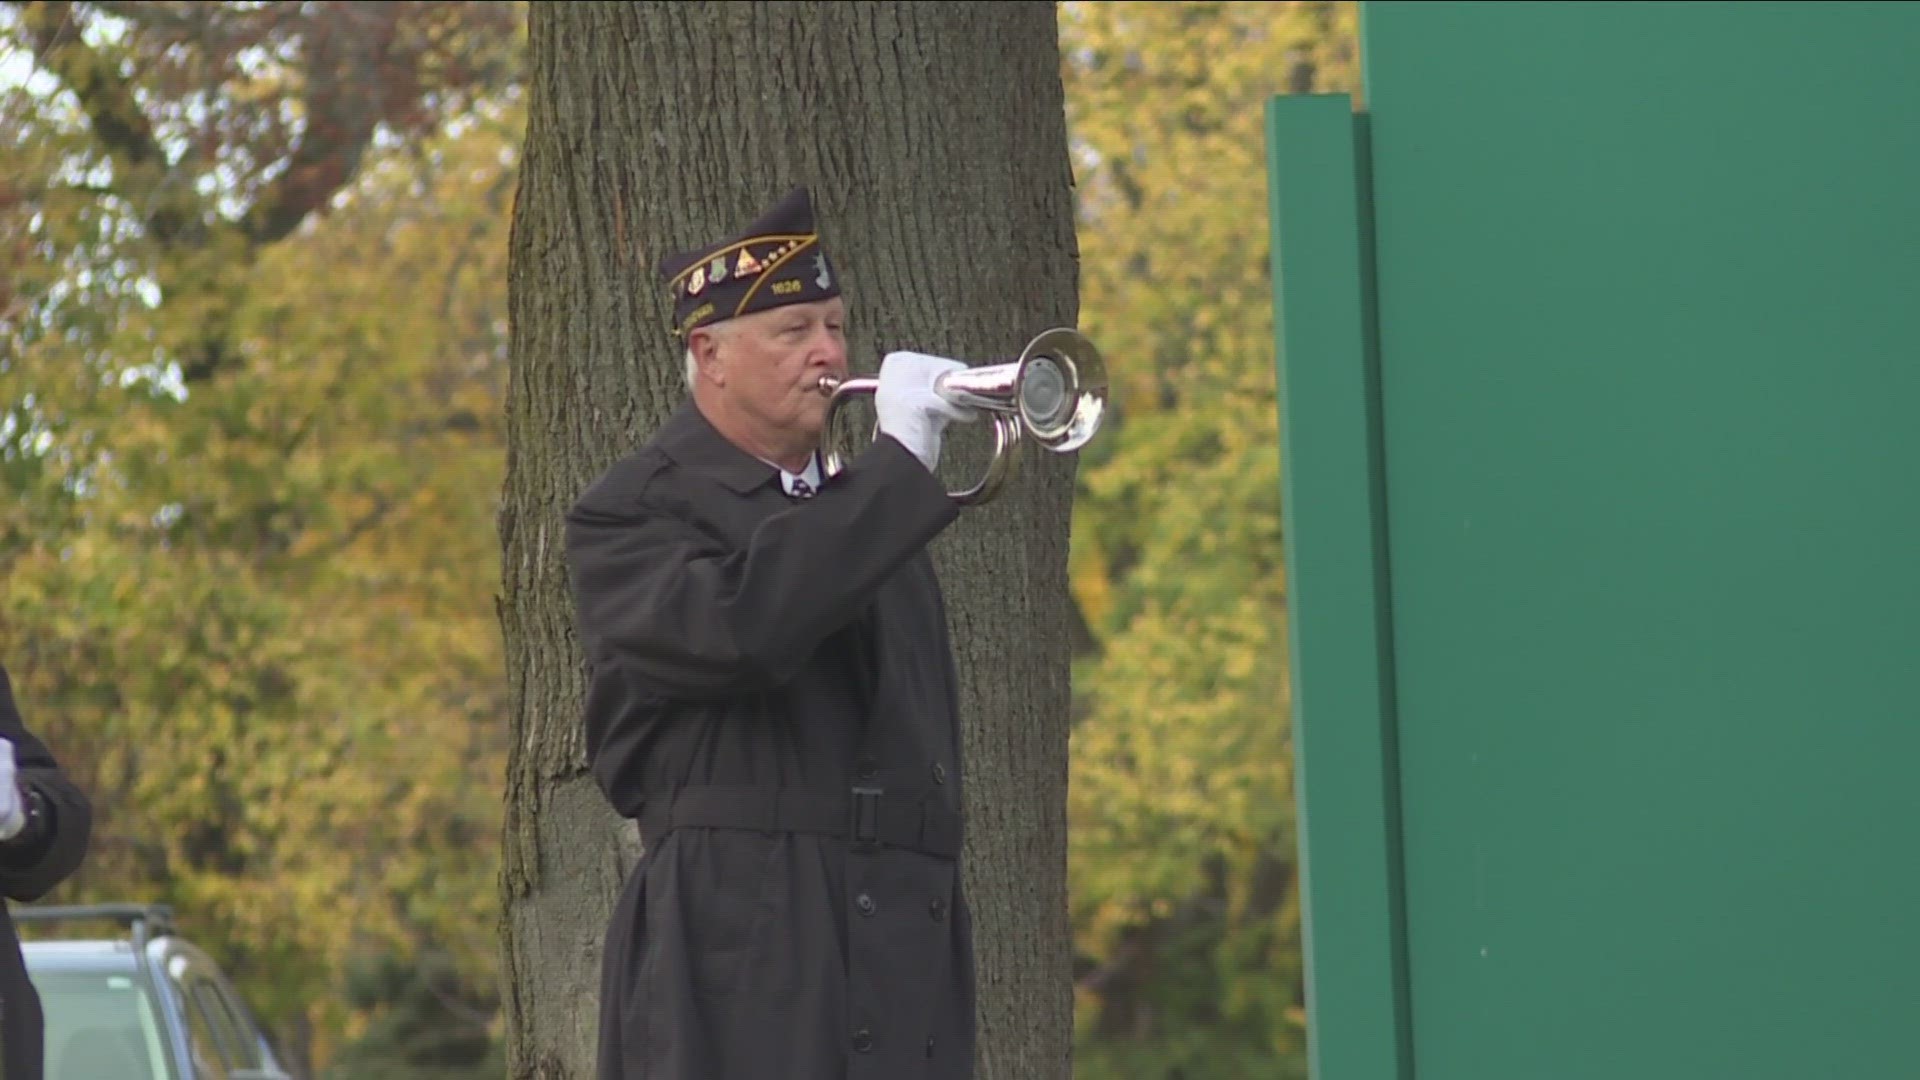 Ceremonies were held across the region Saturday, to pay tribute to those whose served the country.